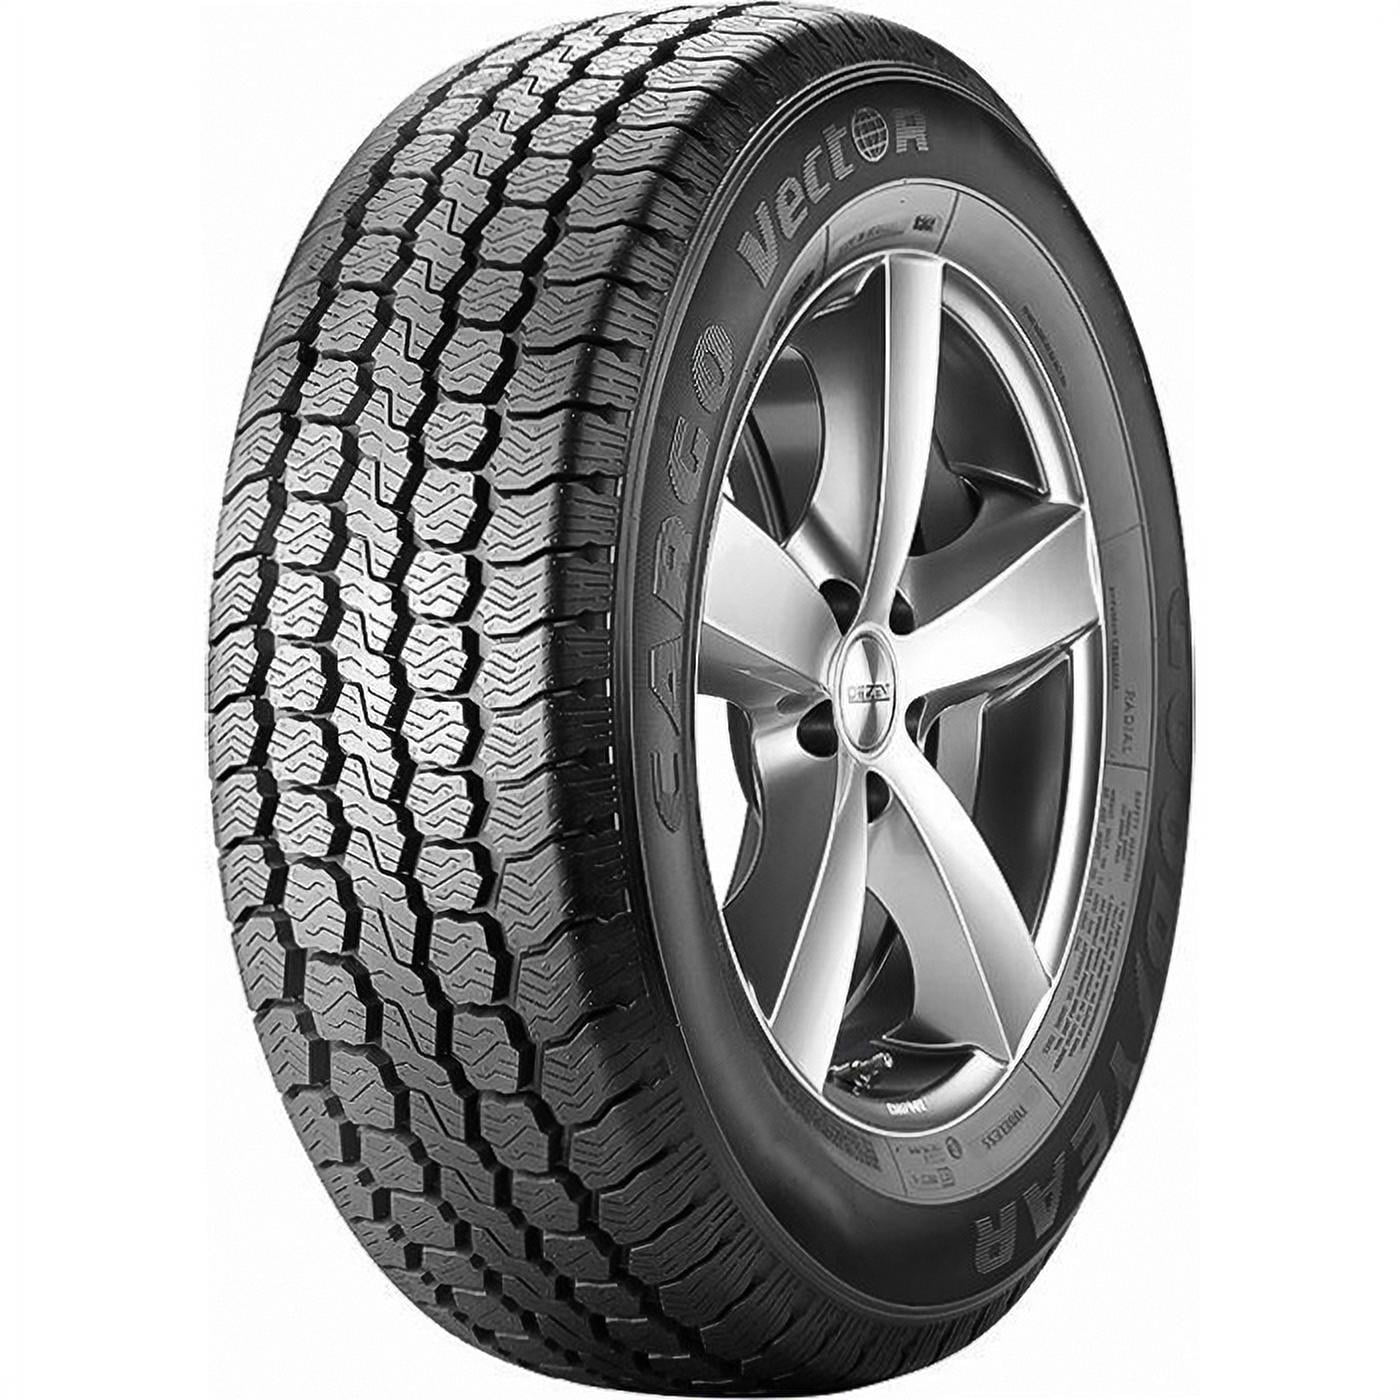 285/65R16 8 Goodyear Tire Load D Vector Ply Commercial Cargo